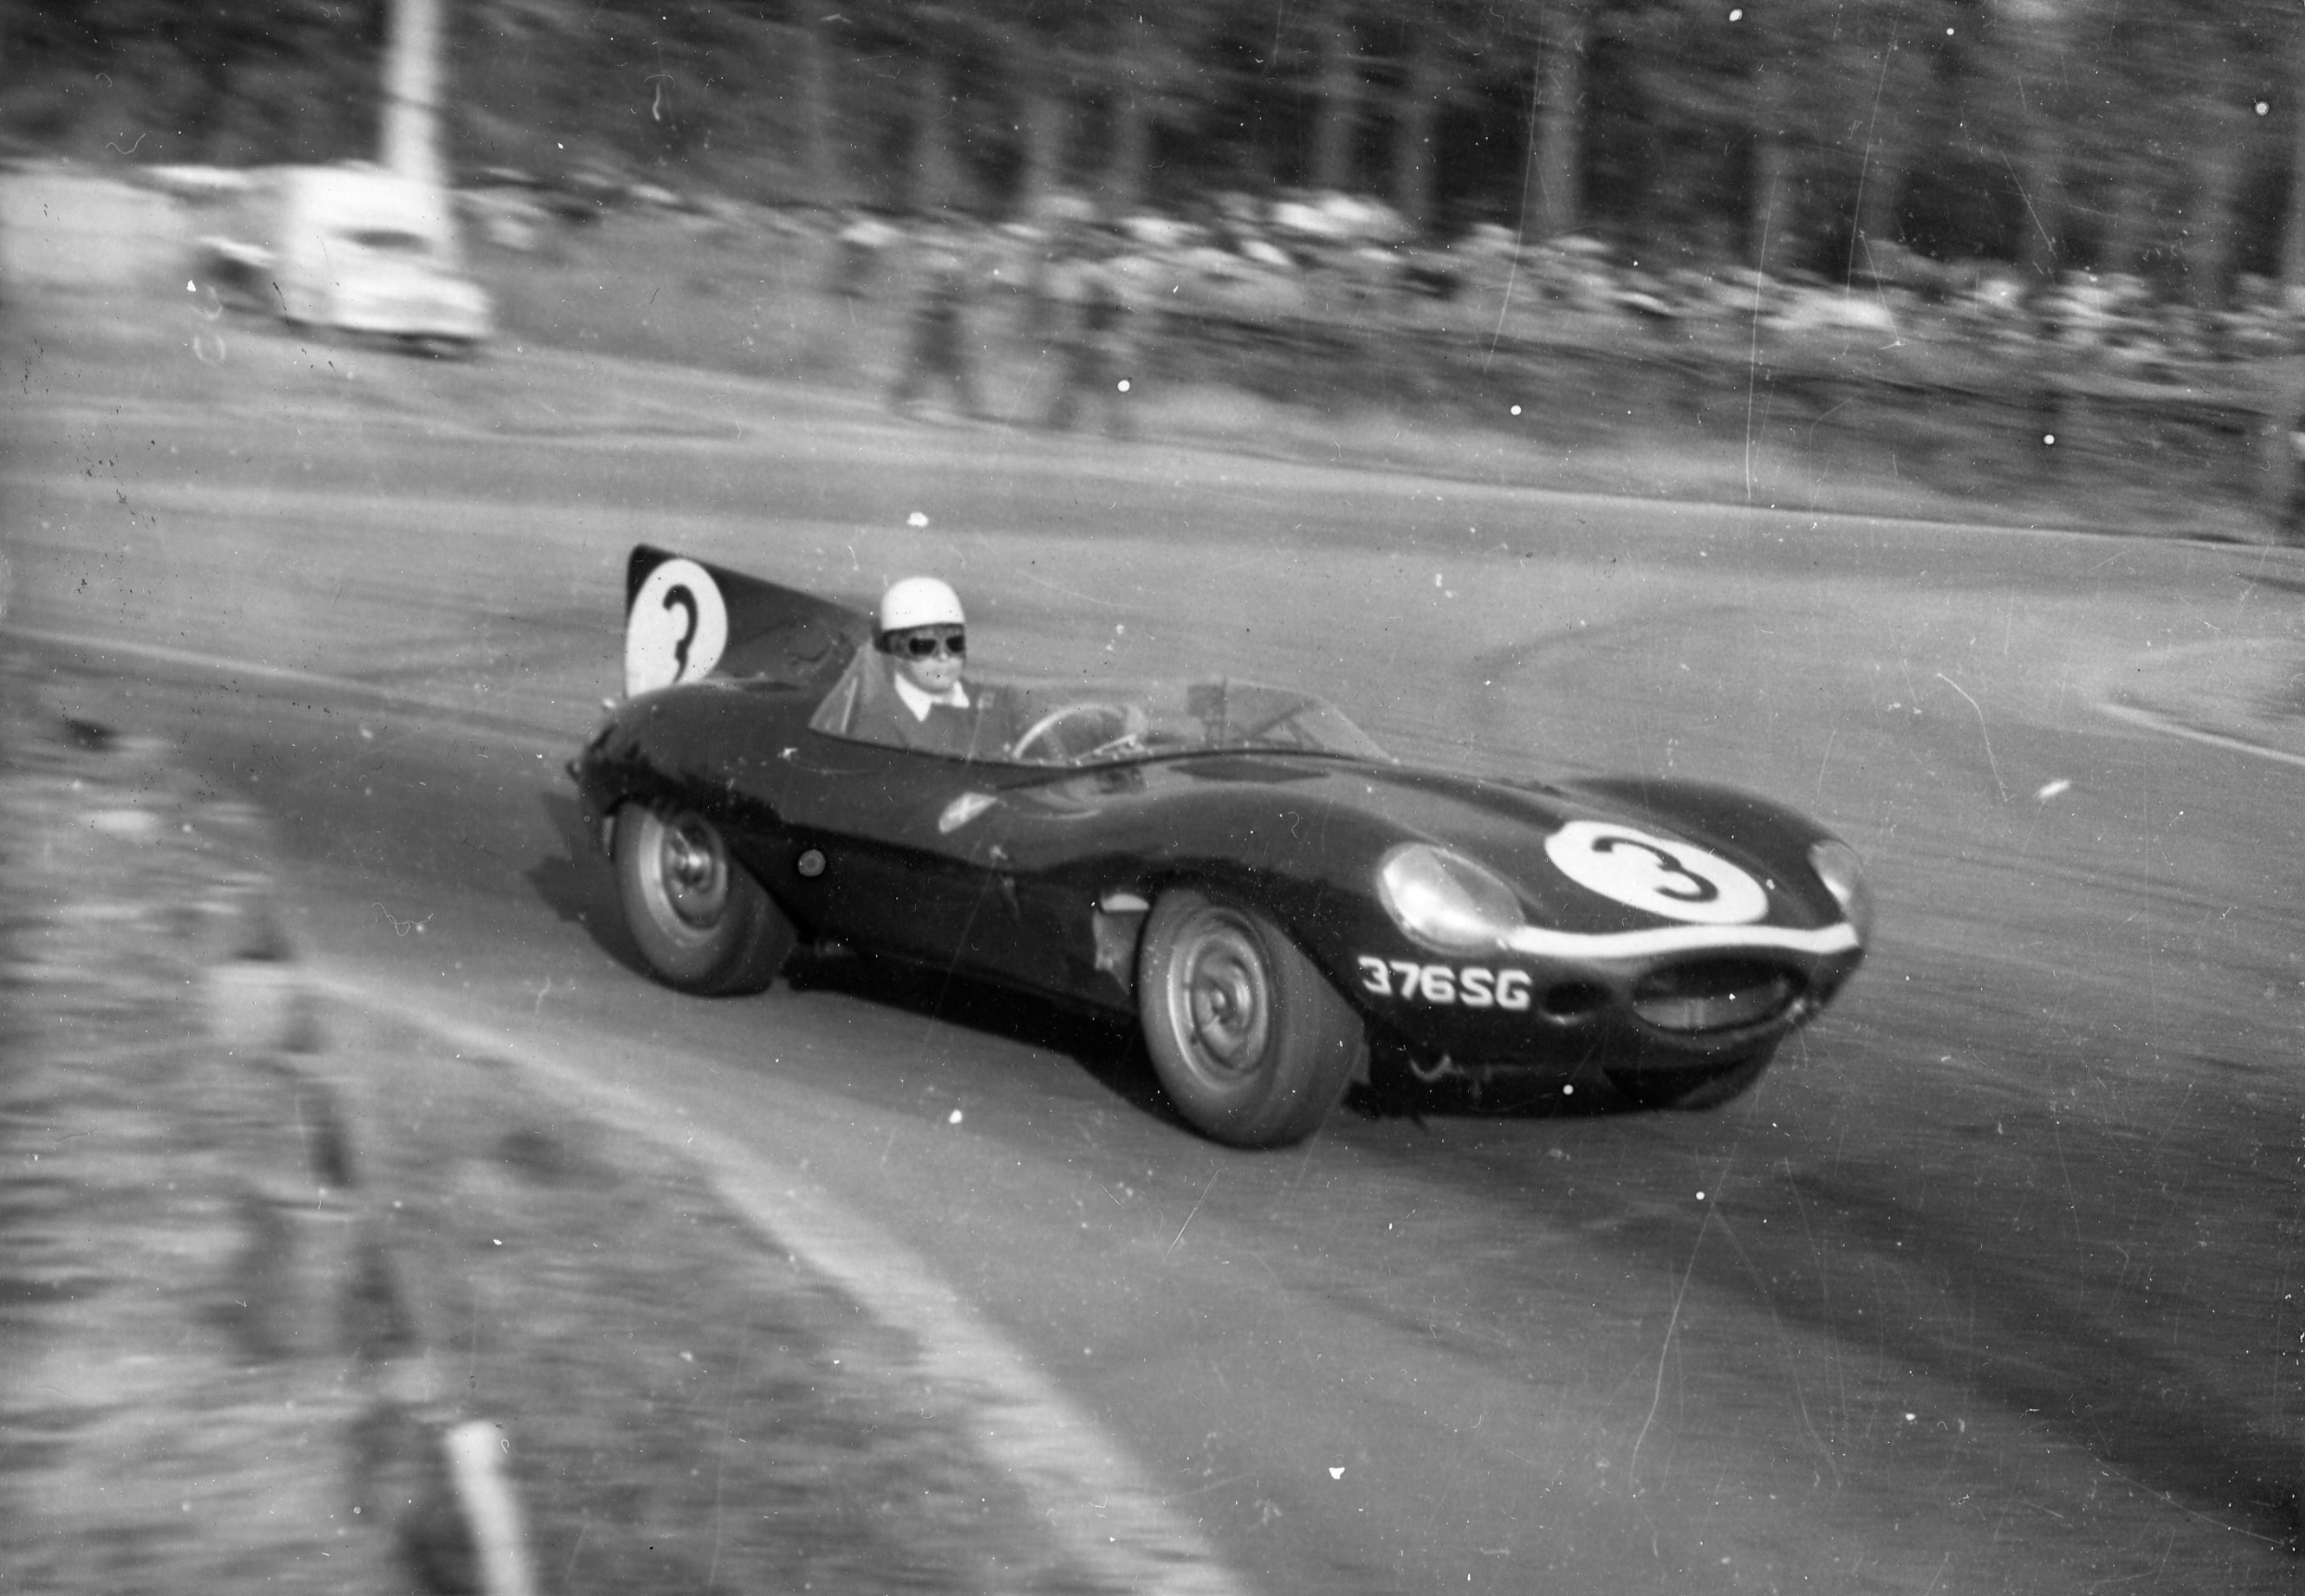 Two Scottish drivers, Ron Flockhart and Ninian Sanderson, won the race representing the Ecosse team in 1957 with a Jaguar Type D.